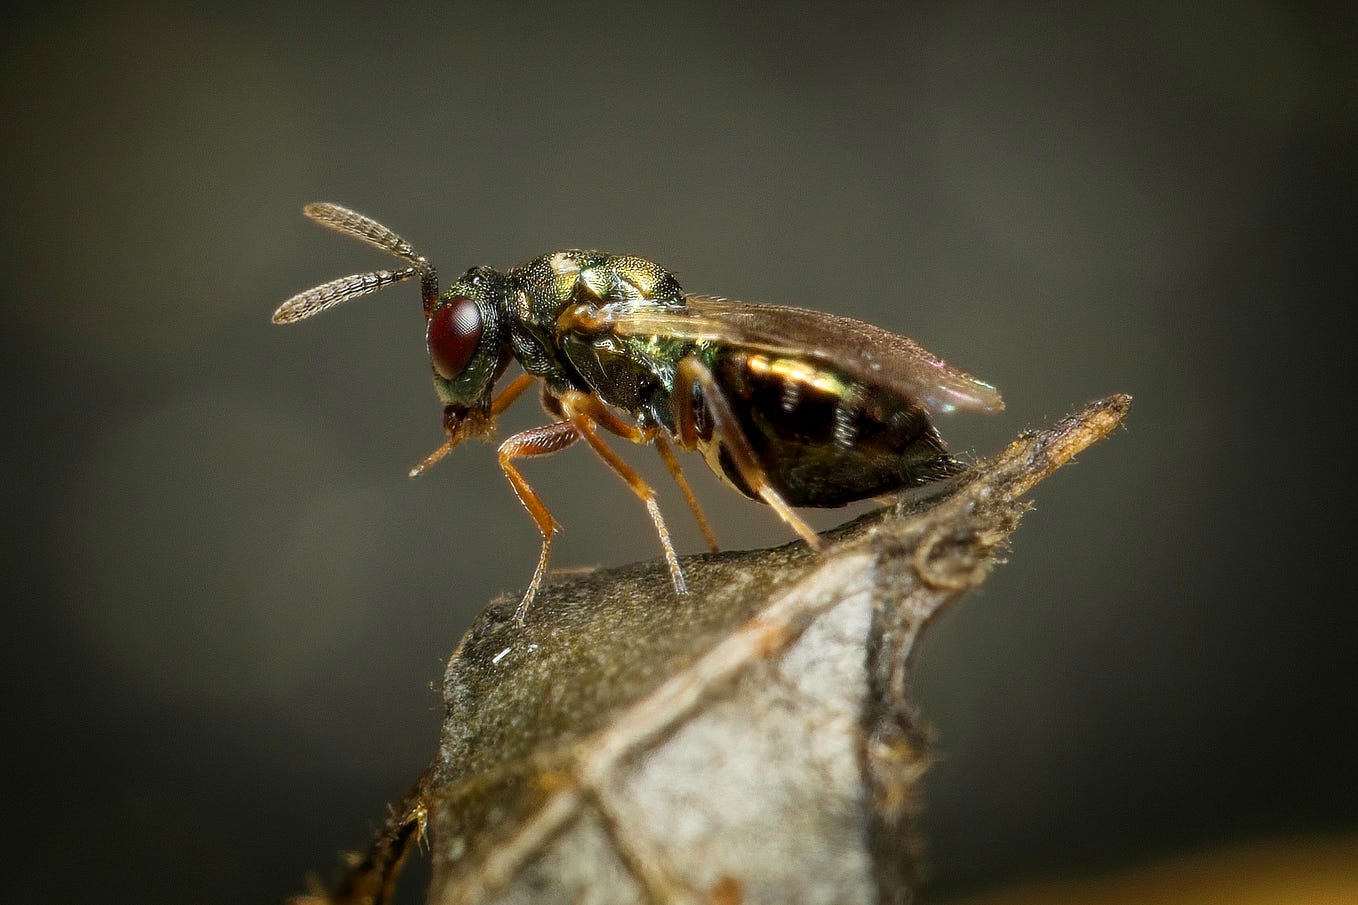 Photographing Insects: Adding a Close-up Lens